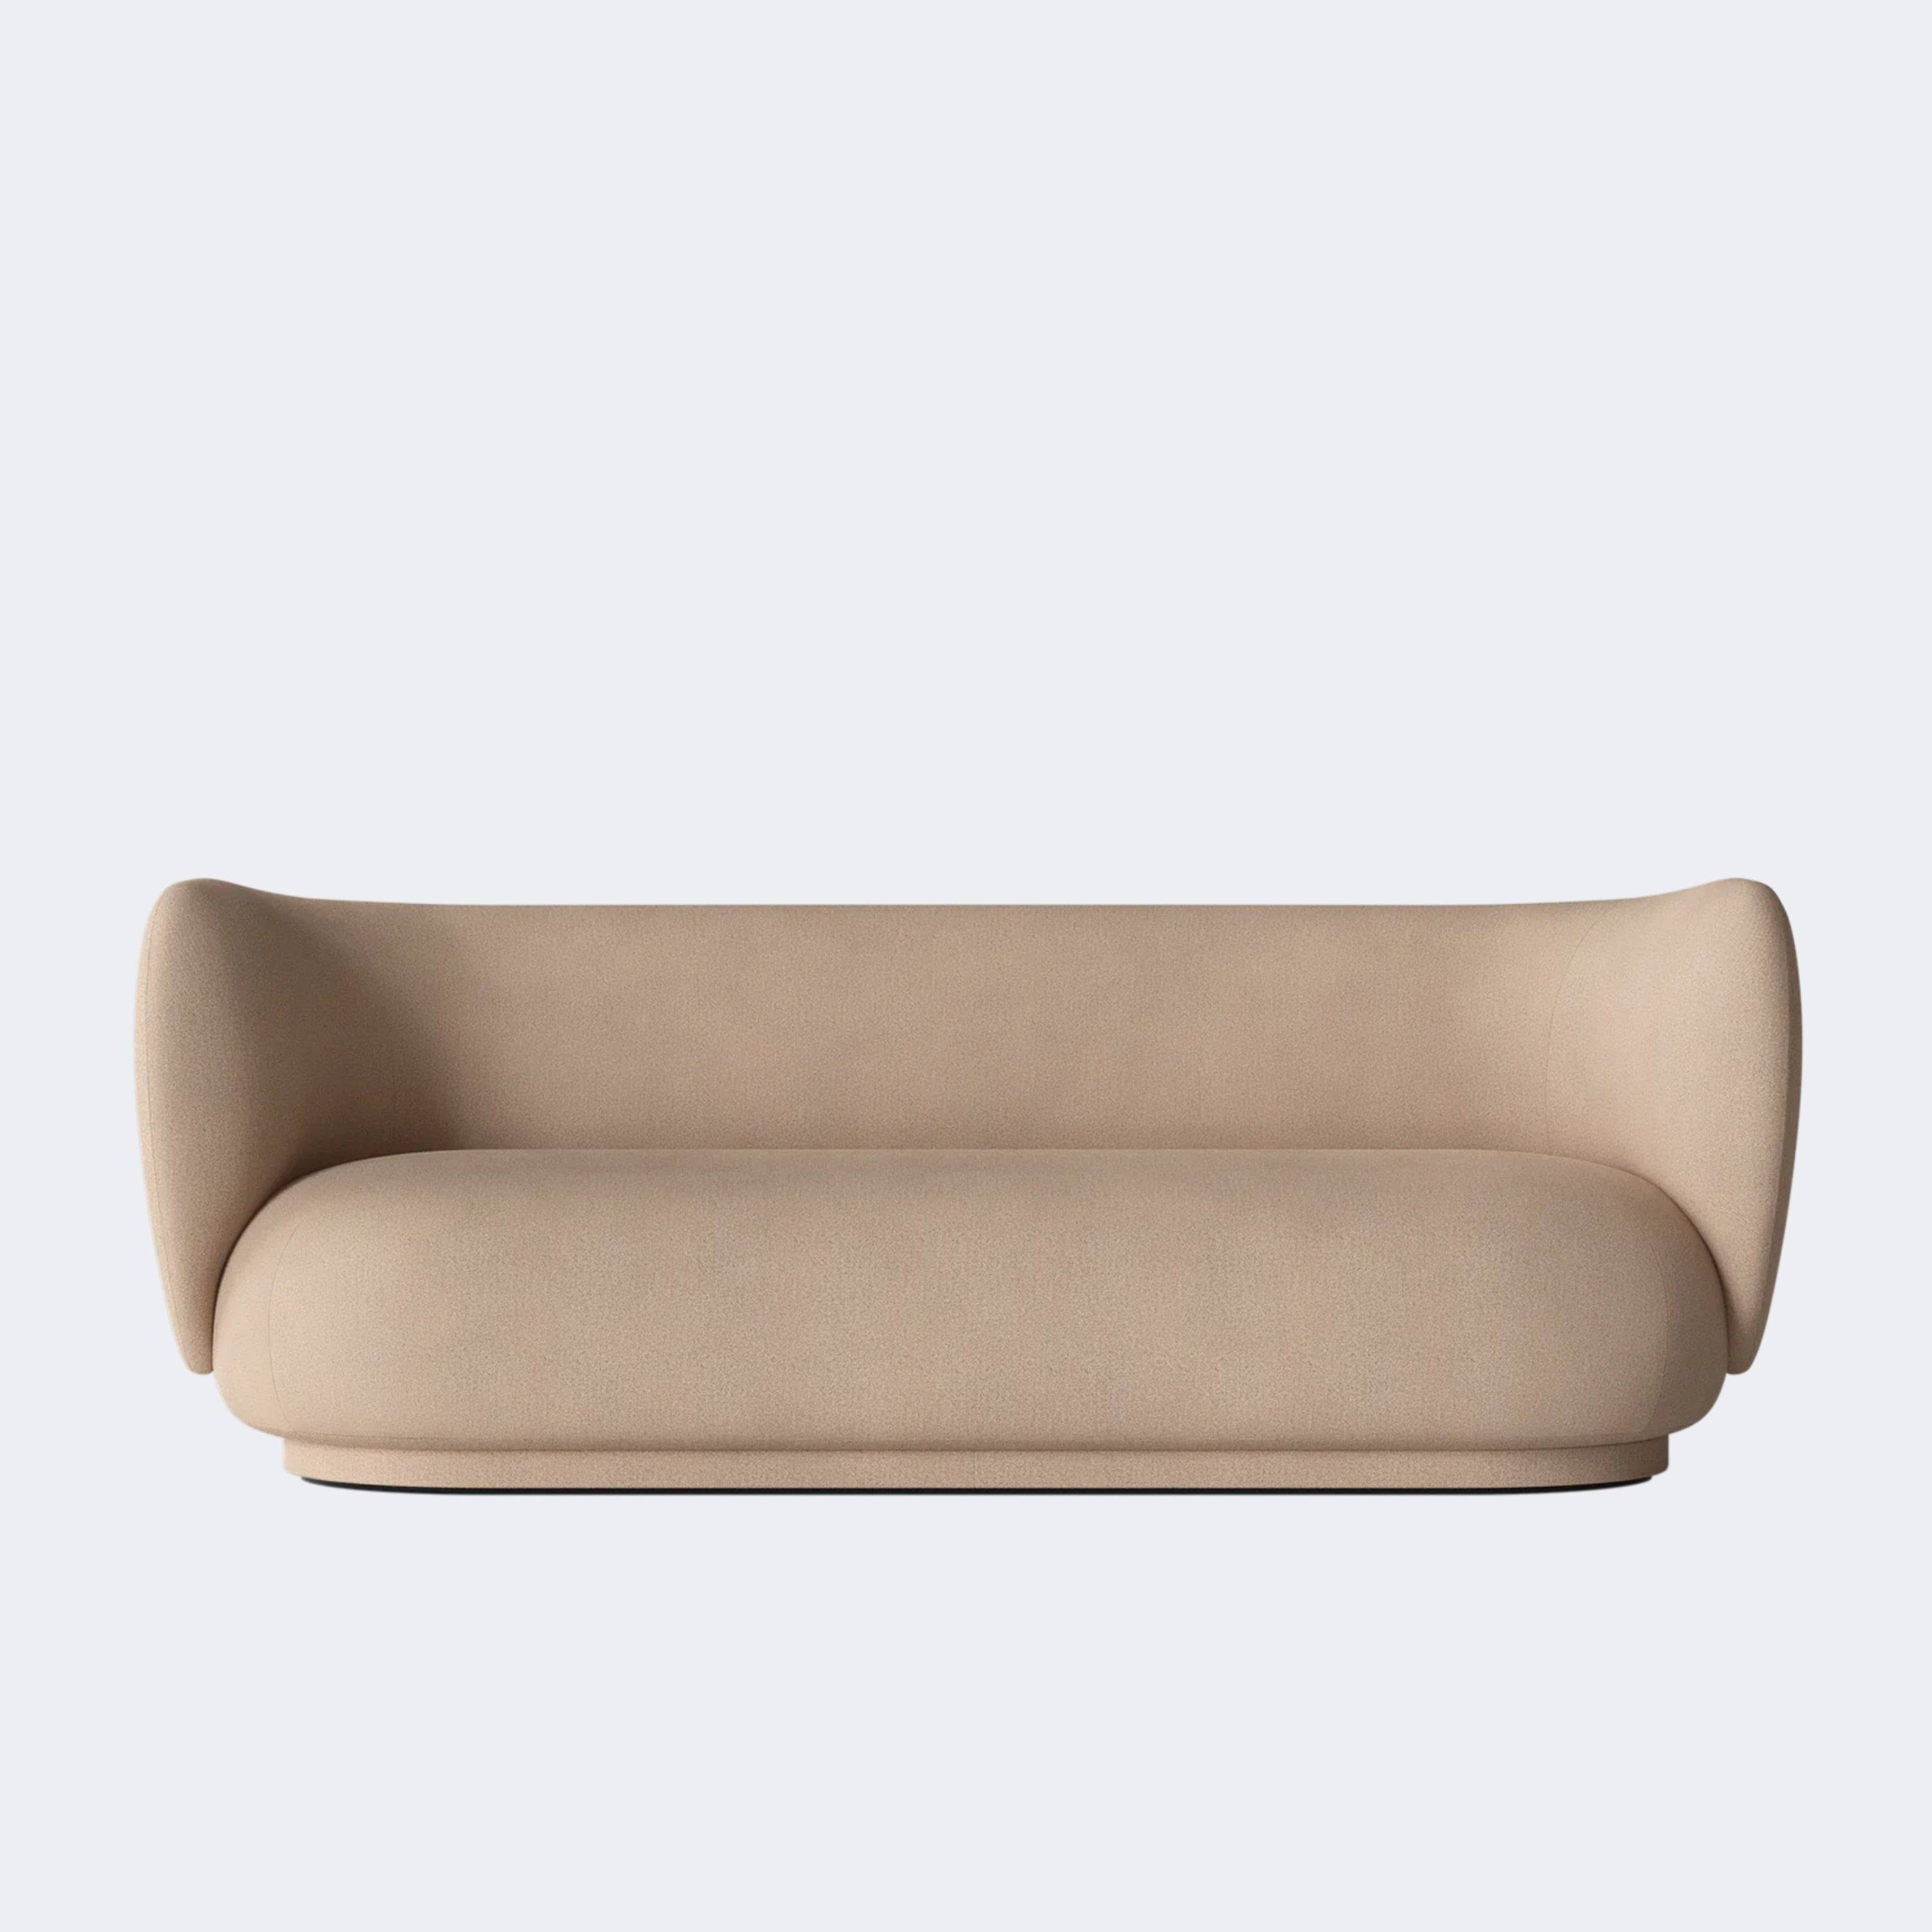 Ferm Living Rico Sofa, 3 Seater Ready To Ship Brushed - Sand - KANSO#Fabric_Brushed - Sand